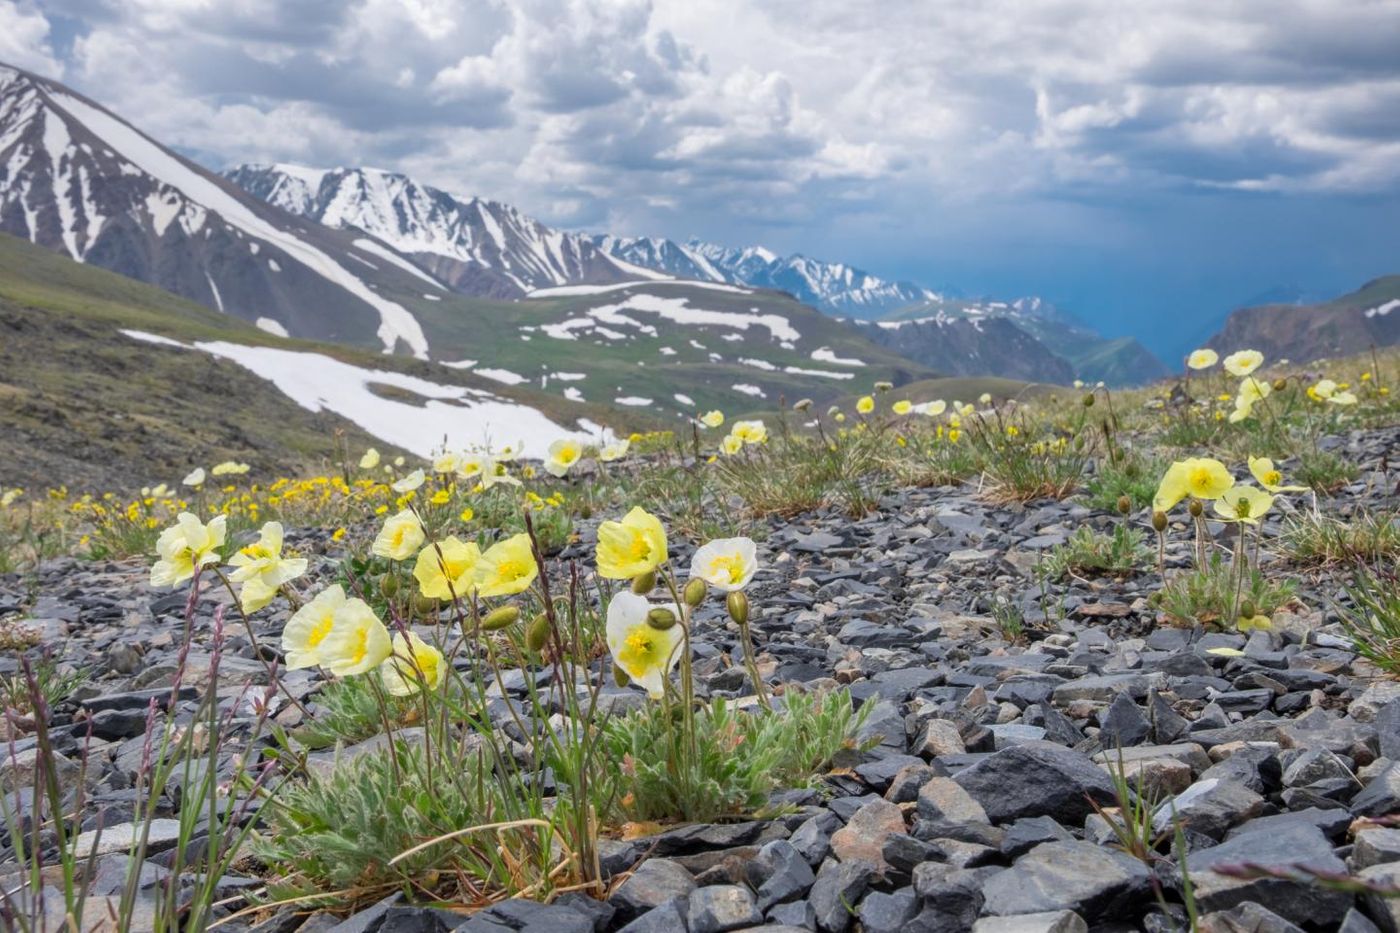 Signs of spring are coming earlier in the Arctic. Photo: Newsweek